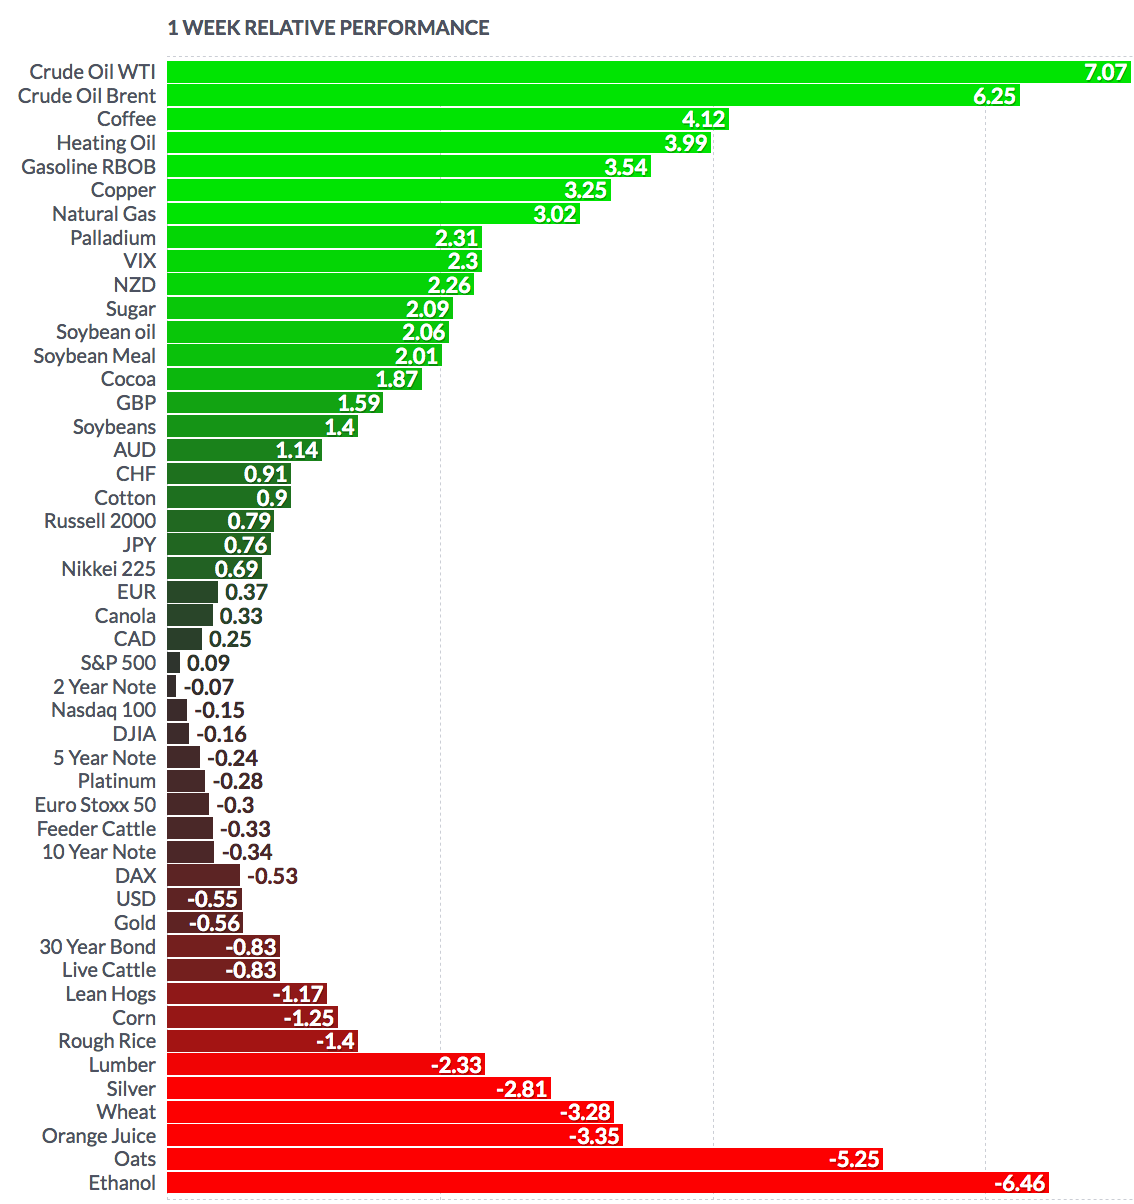 Futures Weekly Performance